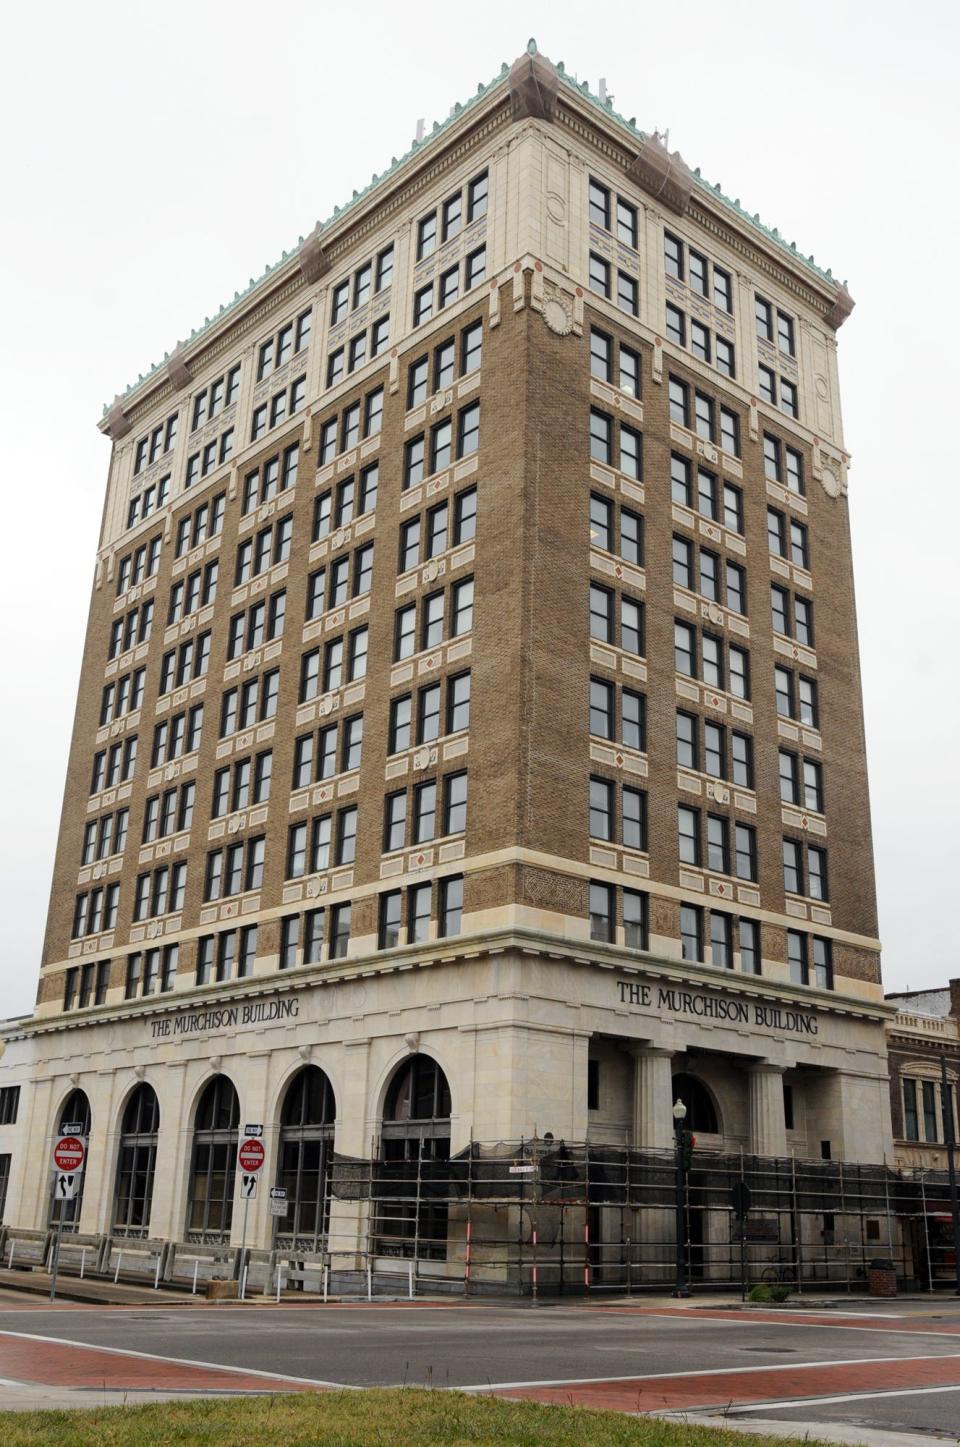 The Murchison Building is located at 201 N. Front St. in downtown Wilmington.